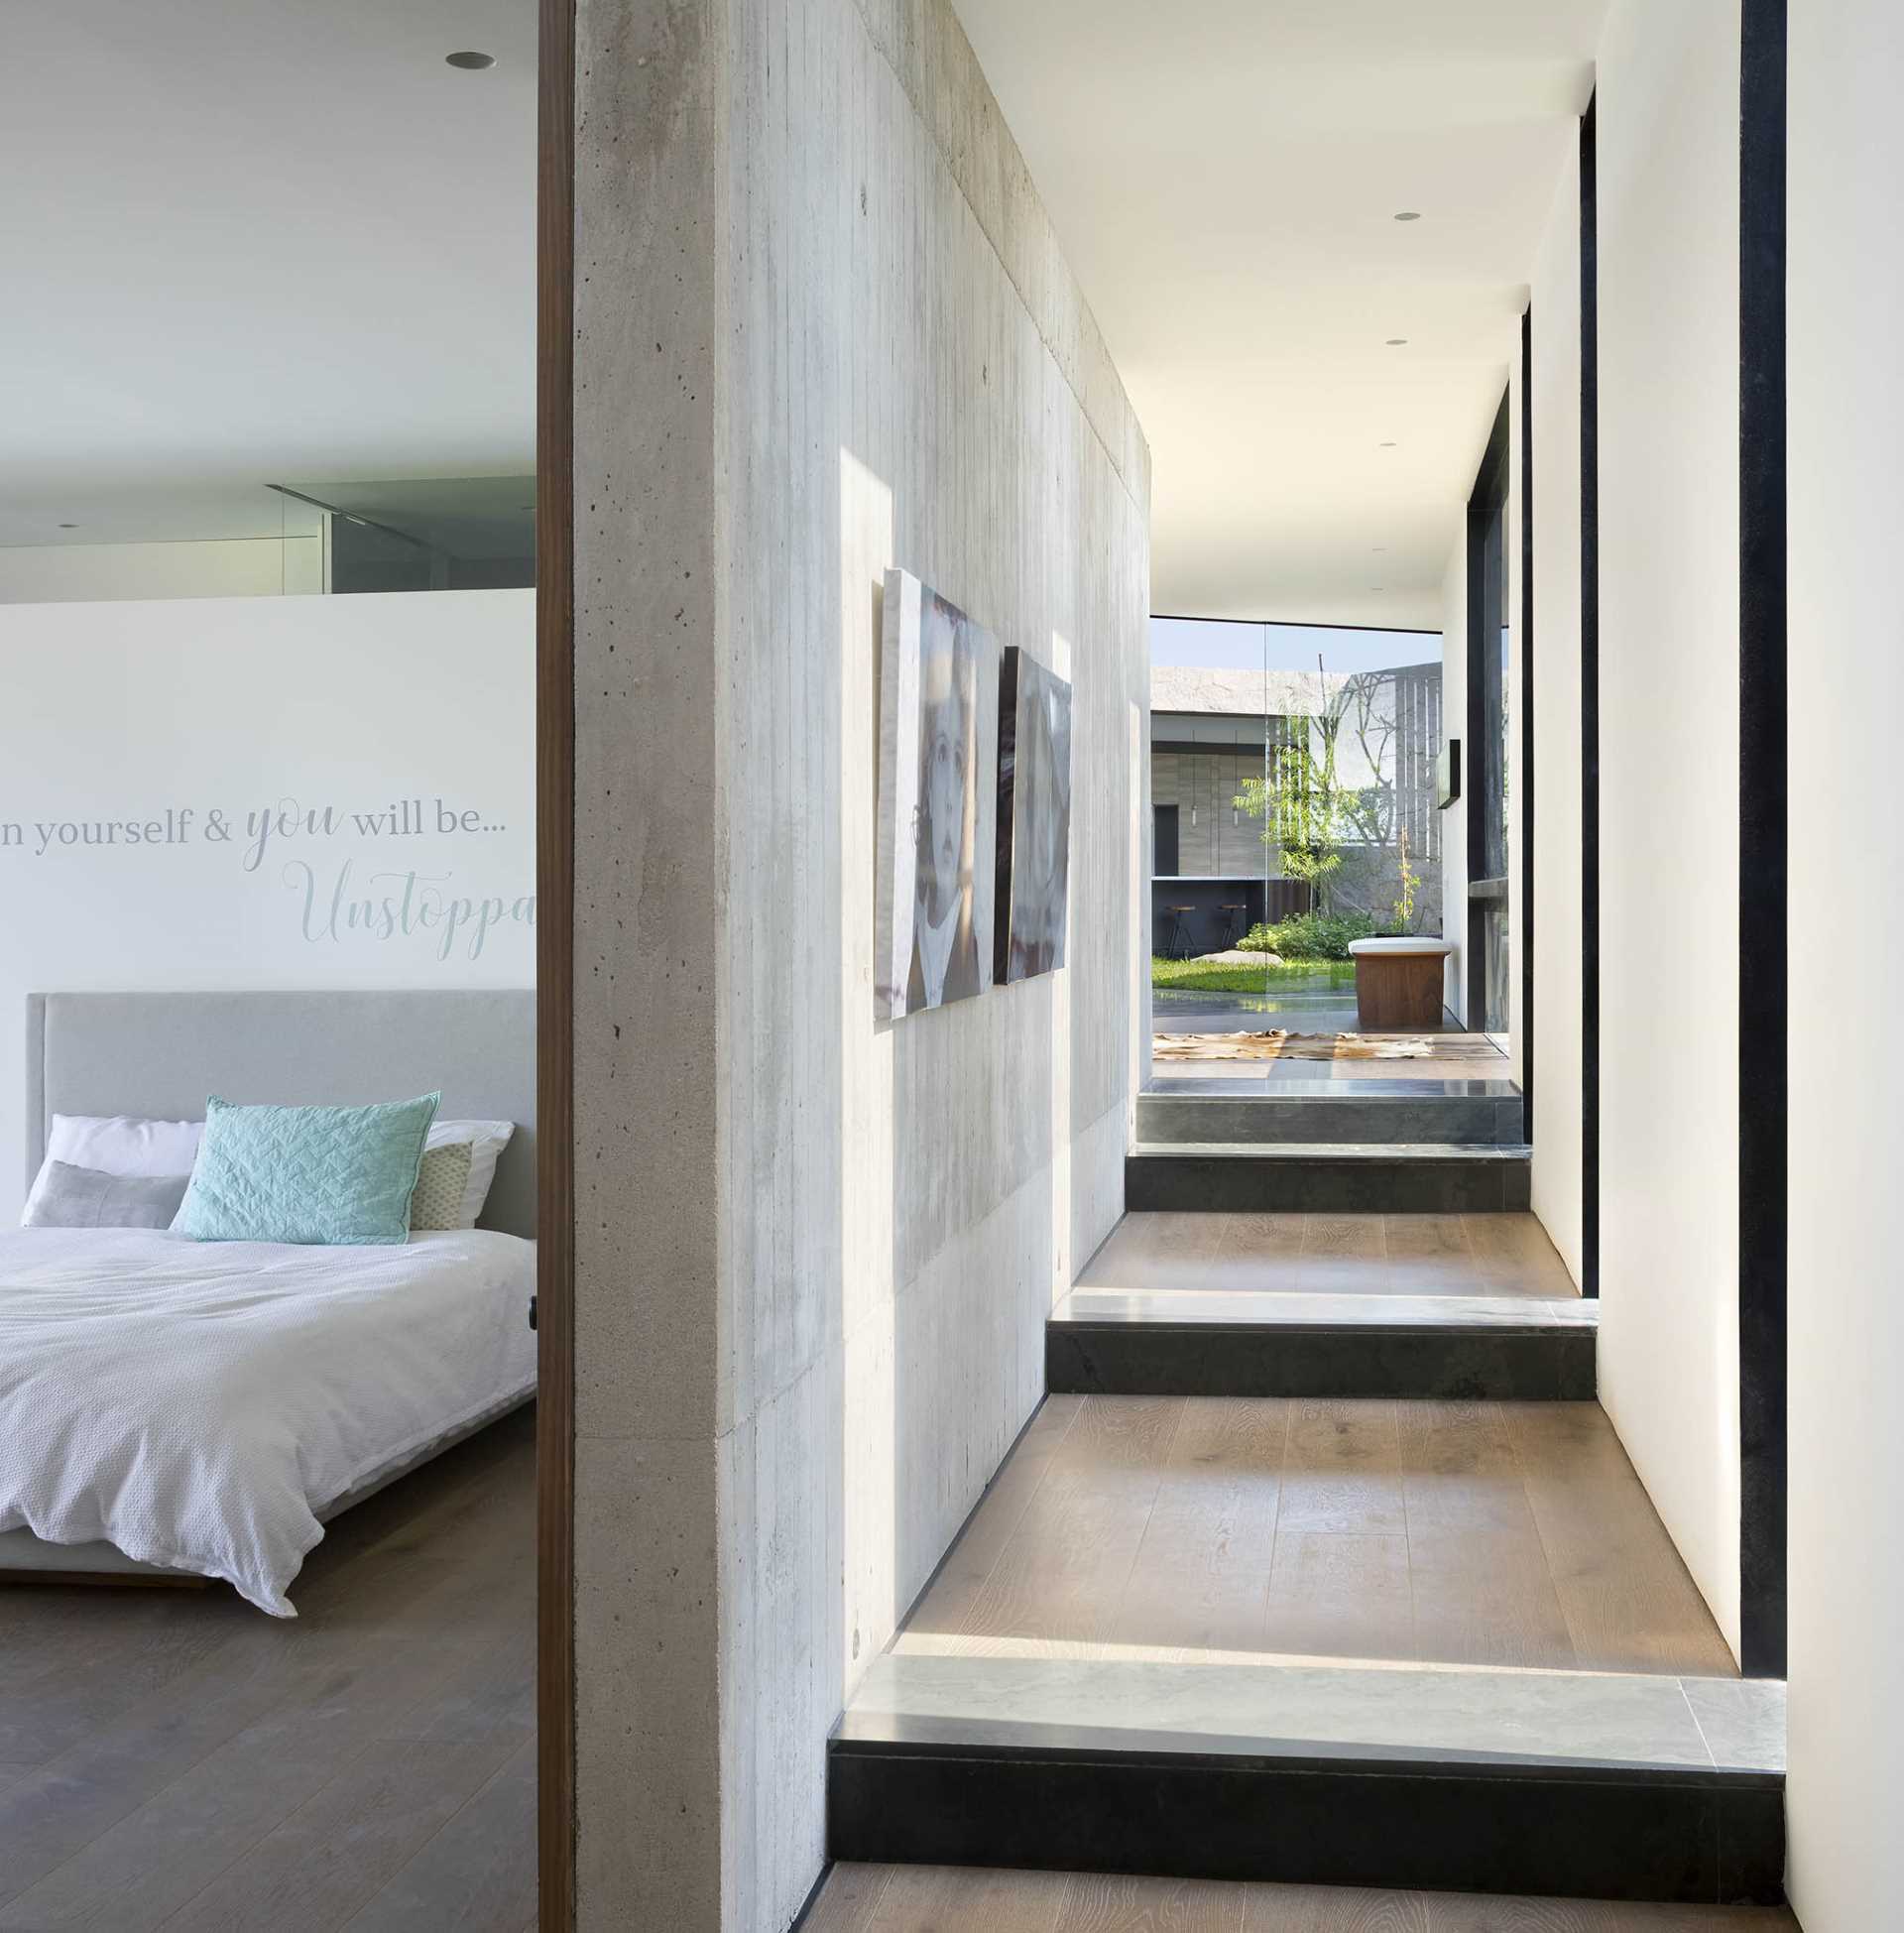 A modern hallway with steps that leads to the bedroom.